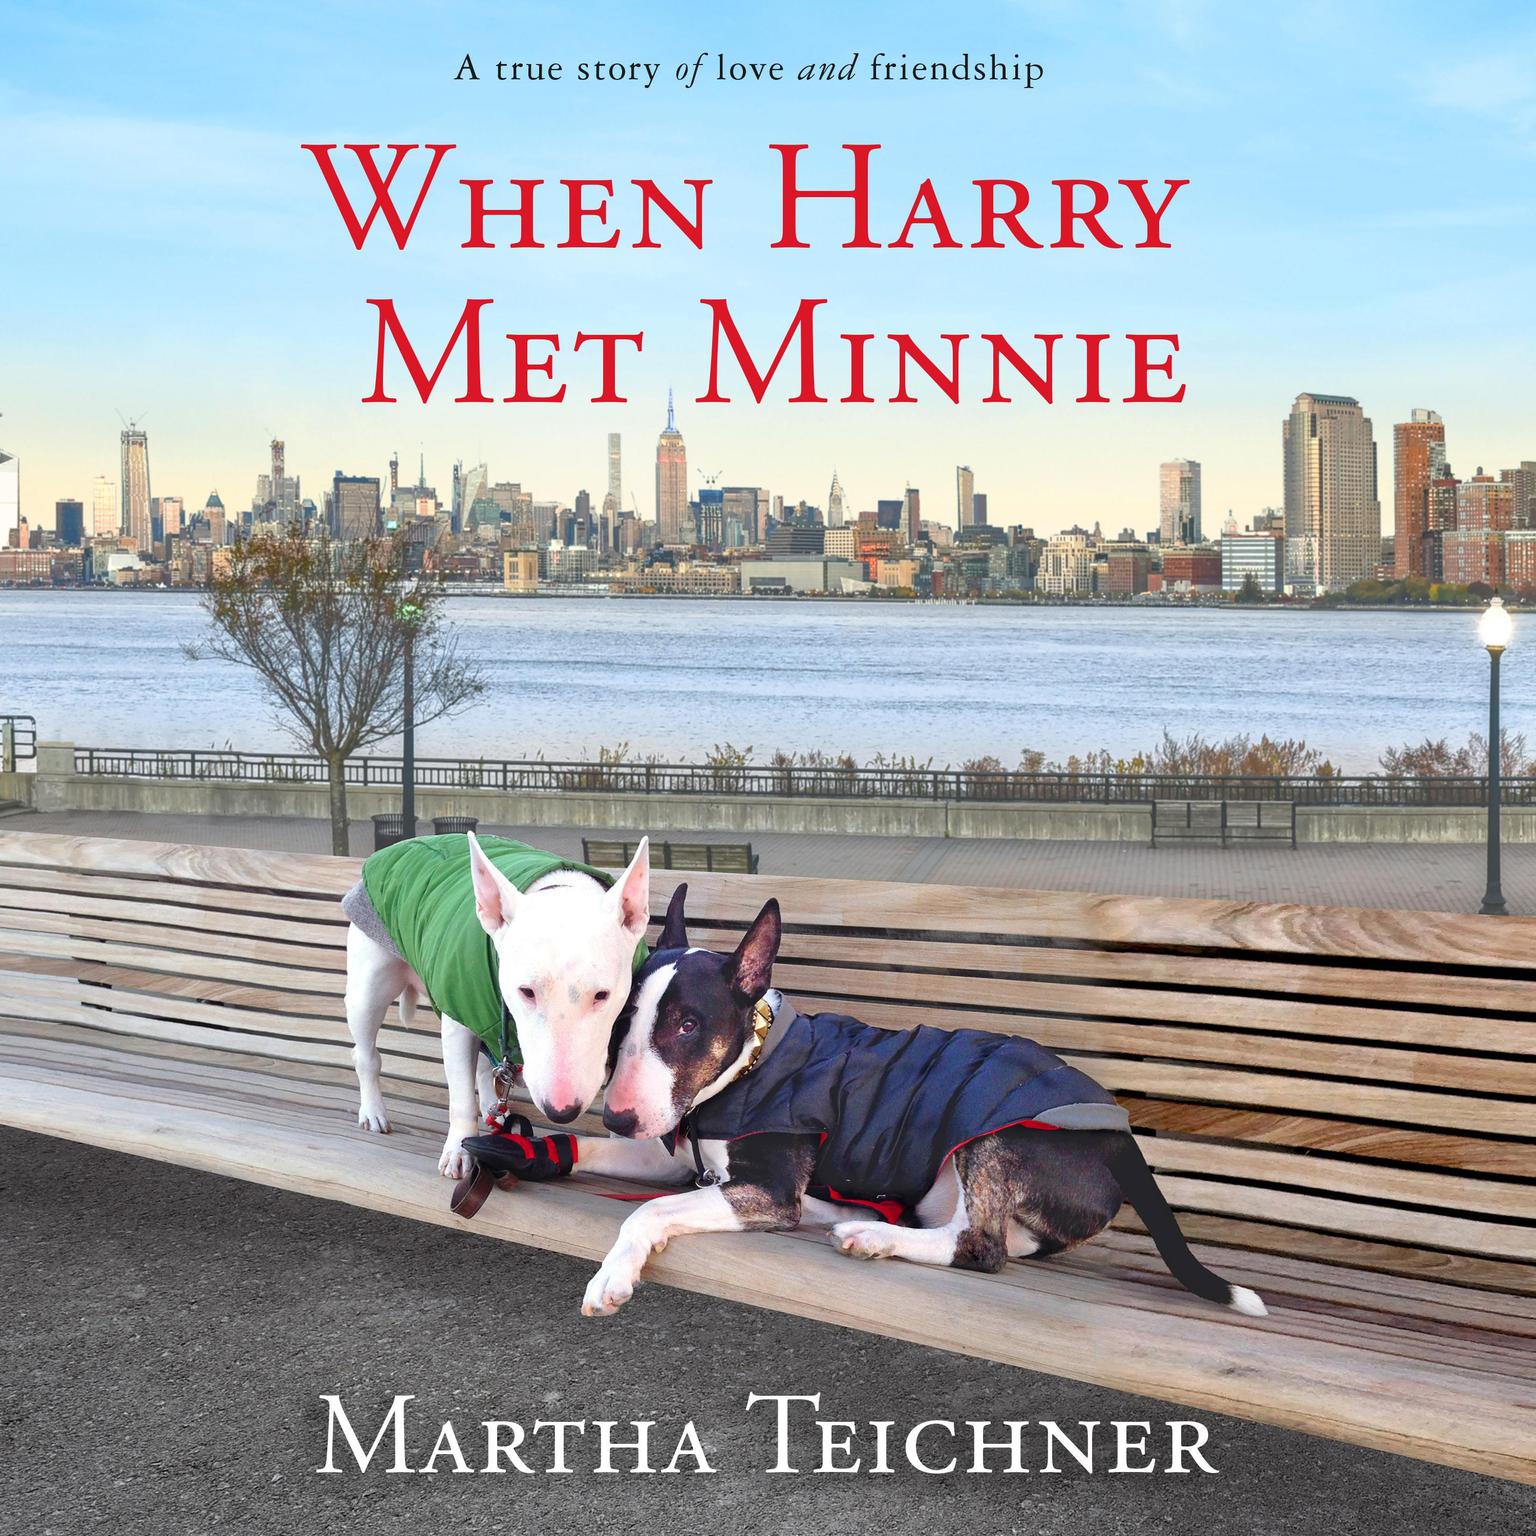 When Harry Met Minnie: A True Story of Love and Friendship Audiobook, by Martha Teichner